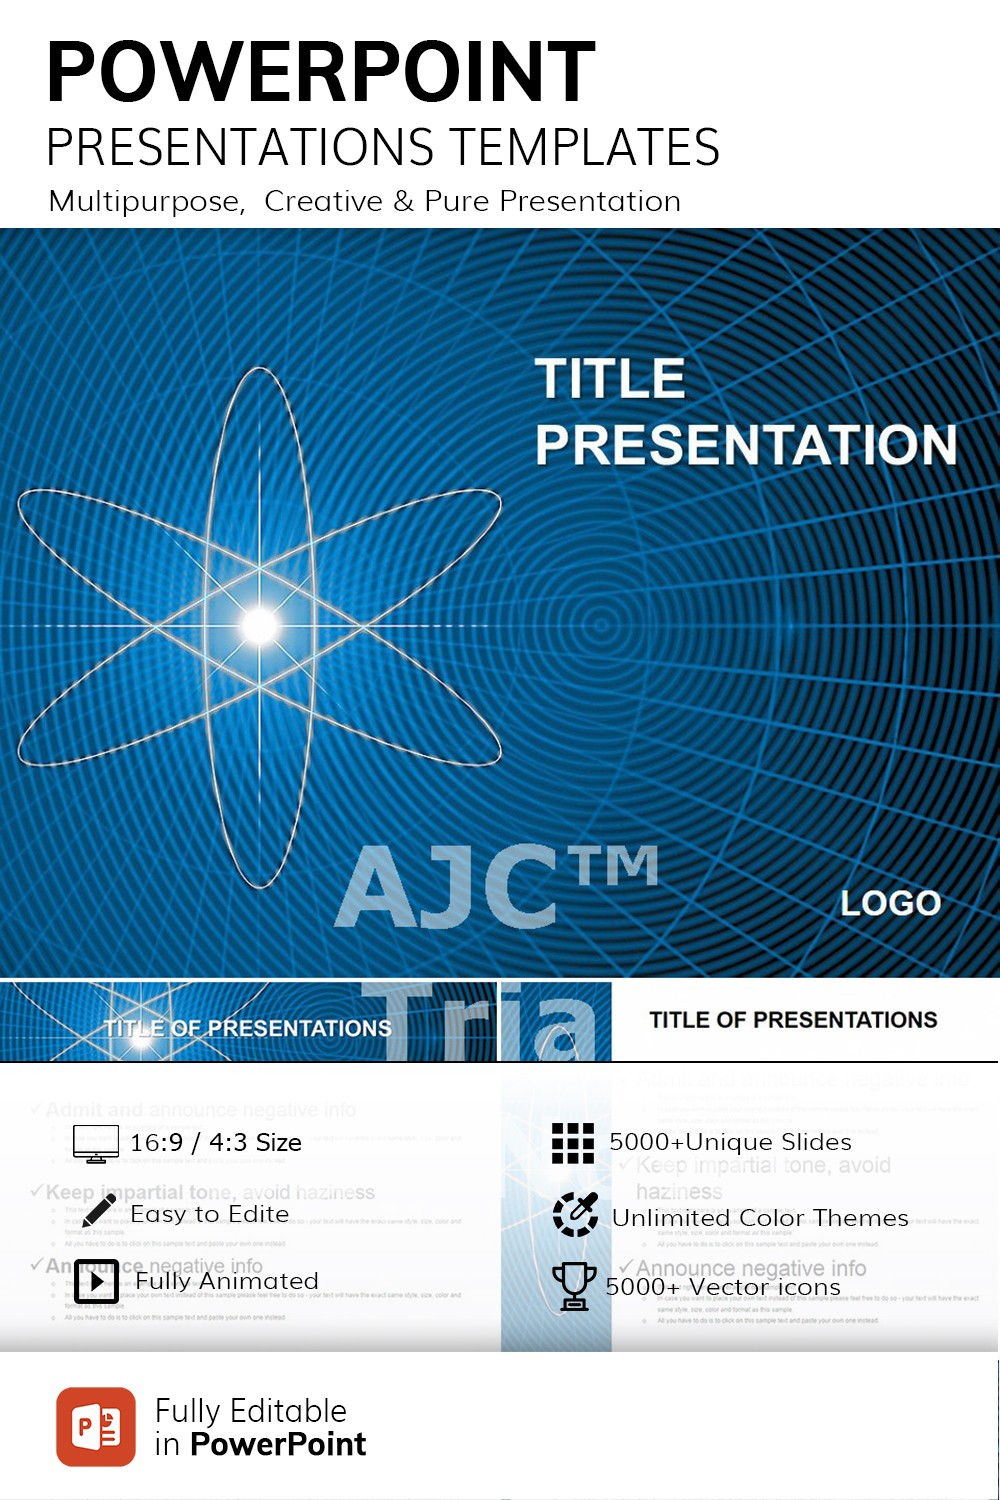 Structure of Atom PowerPoint Templates | ImagineLayout.com